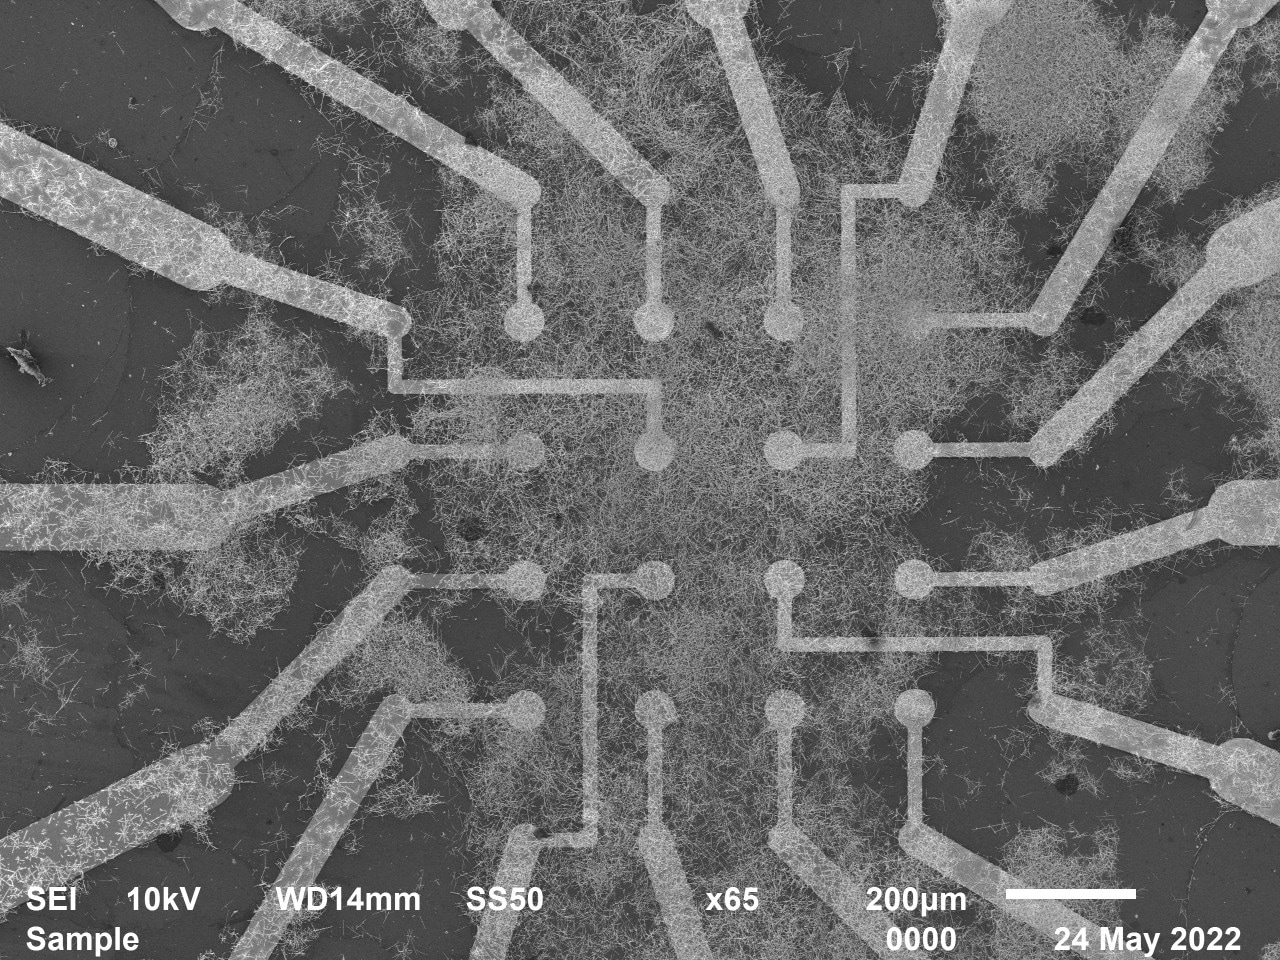 Electrodes interact with the nanowire neural network at the heart of the chip.